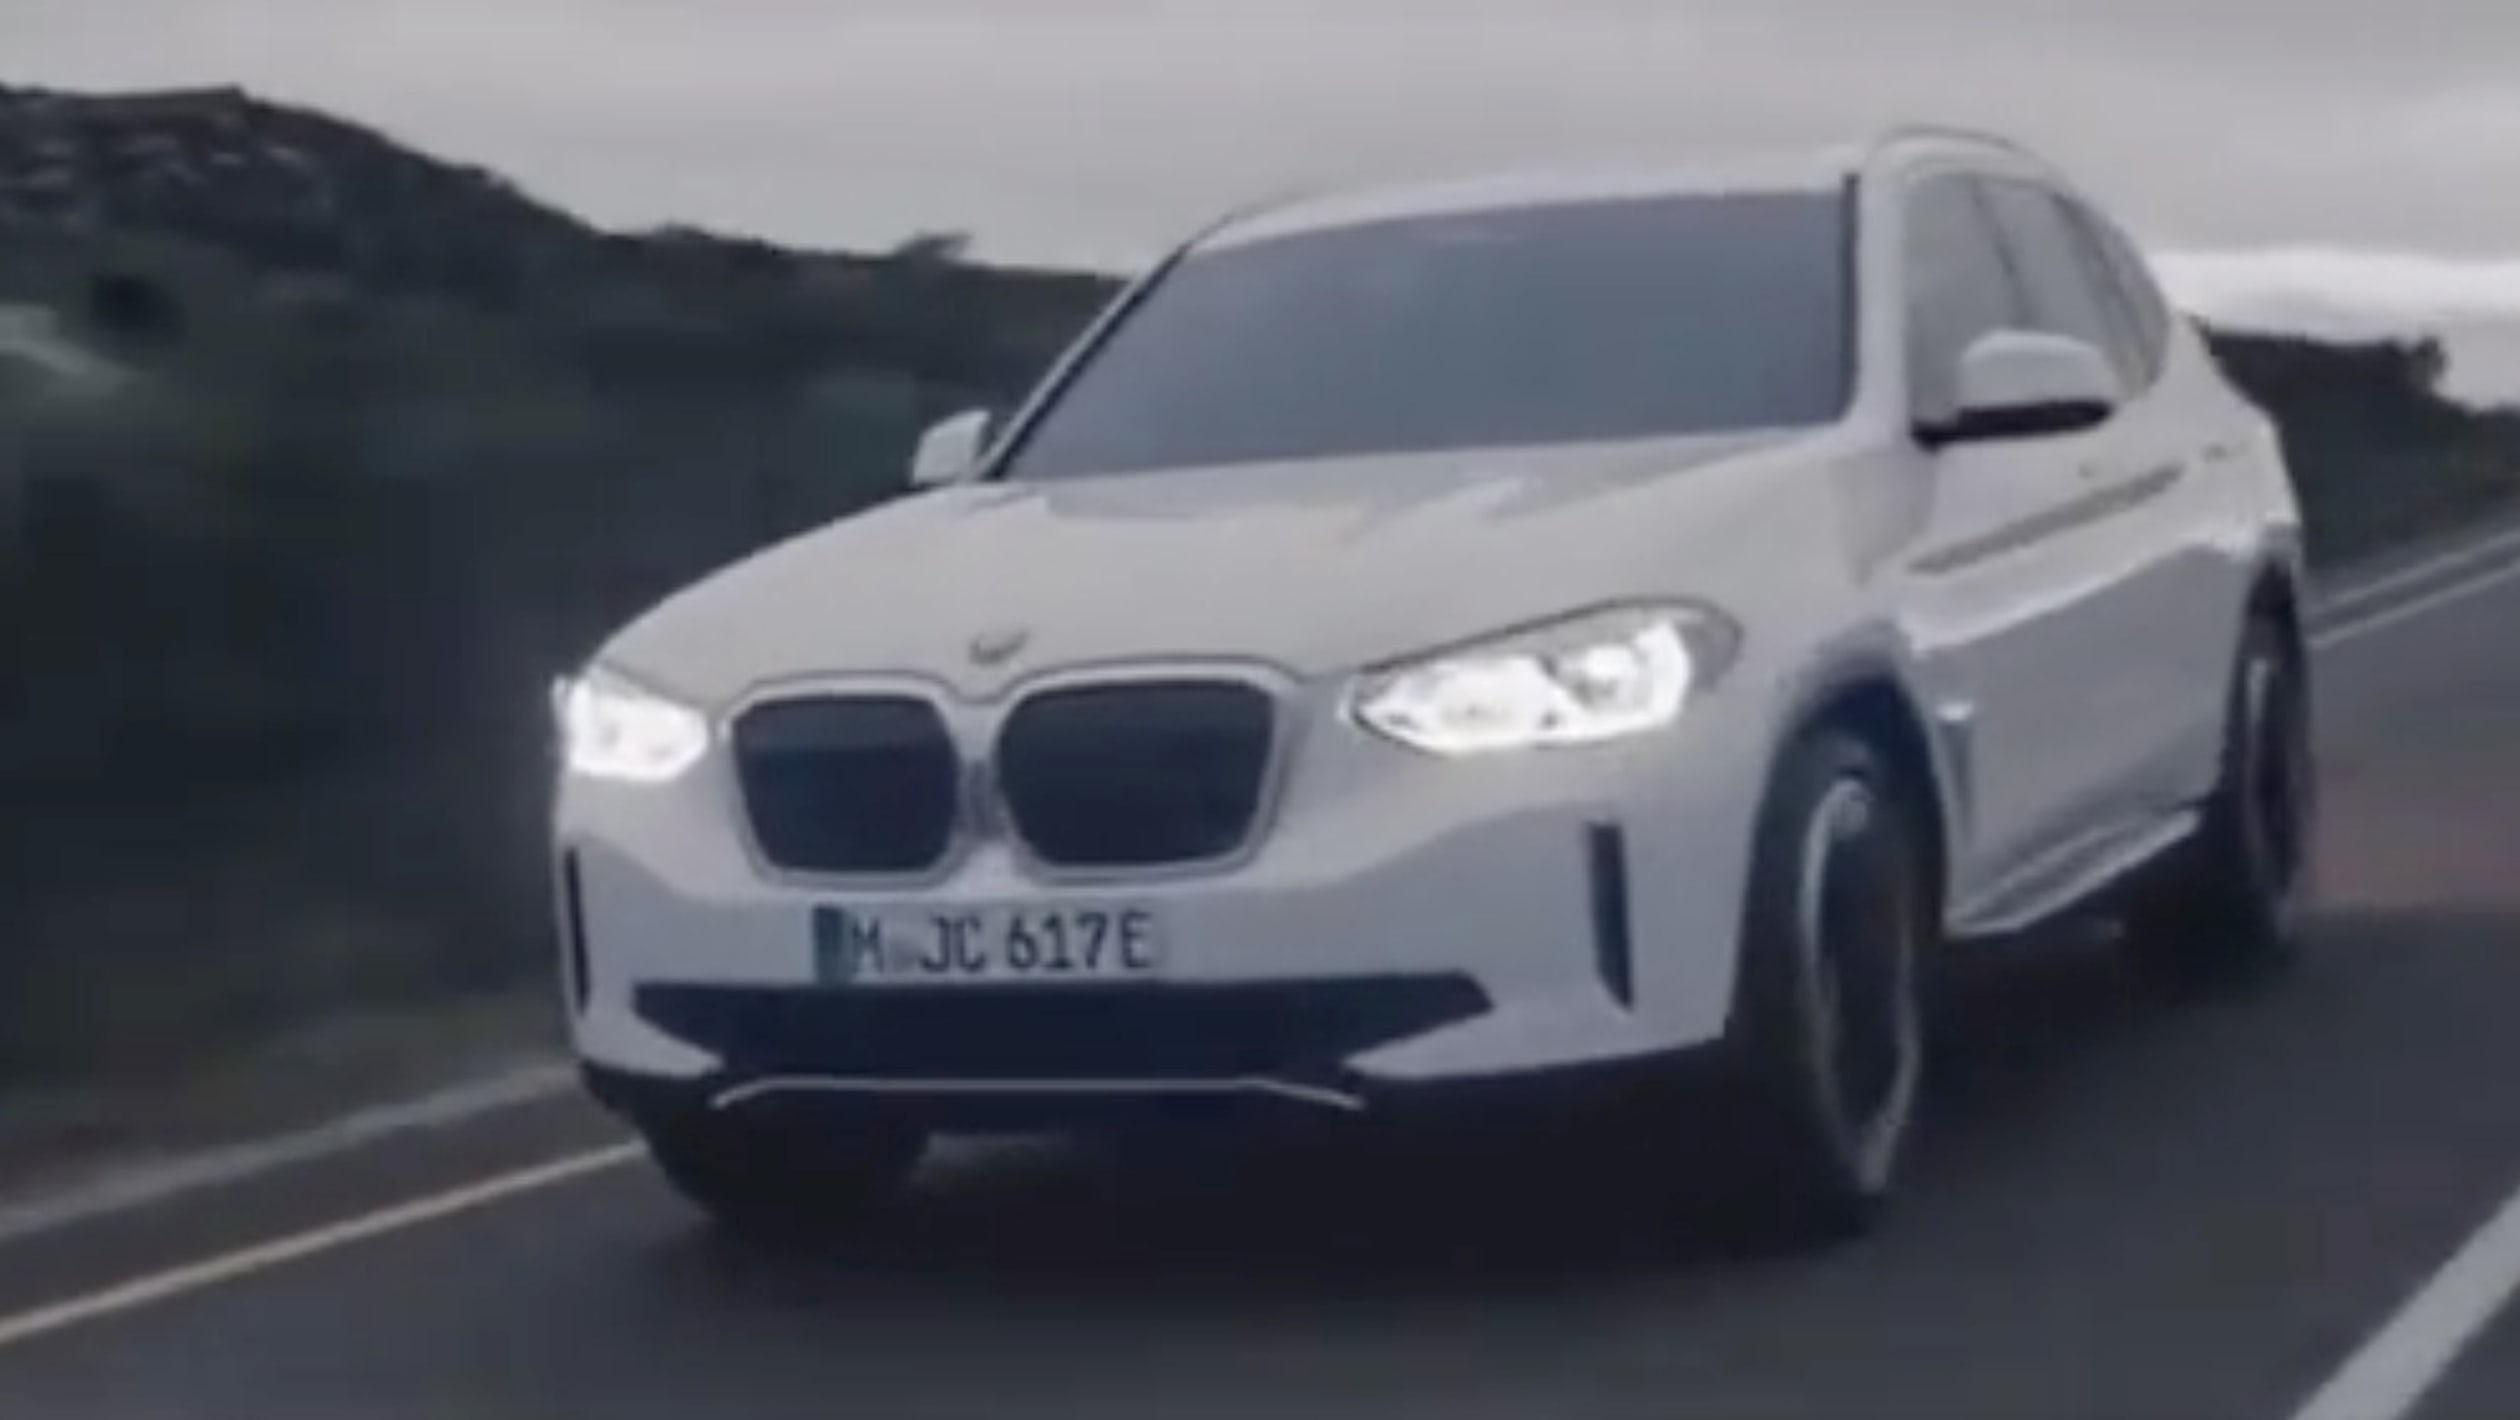 aria-label="BMW iX3 electric SUV leaked images 4"